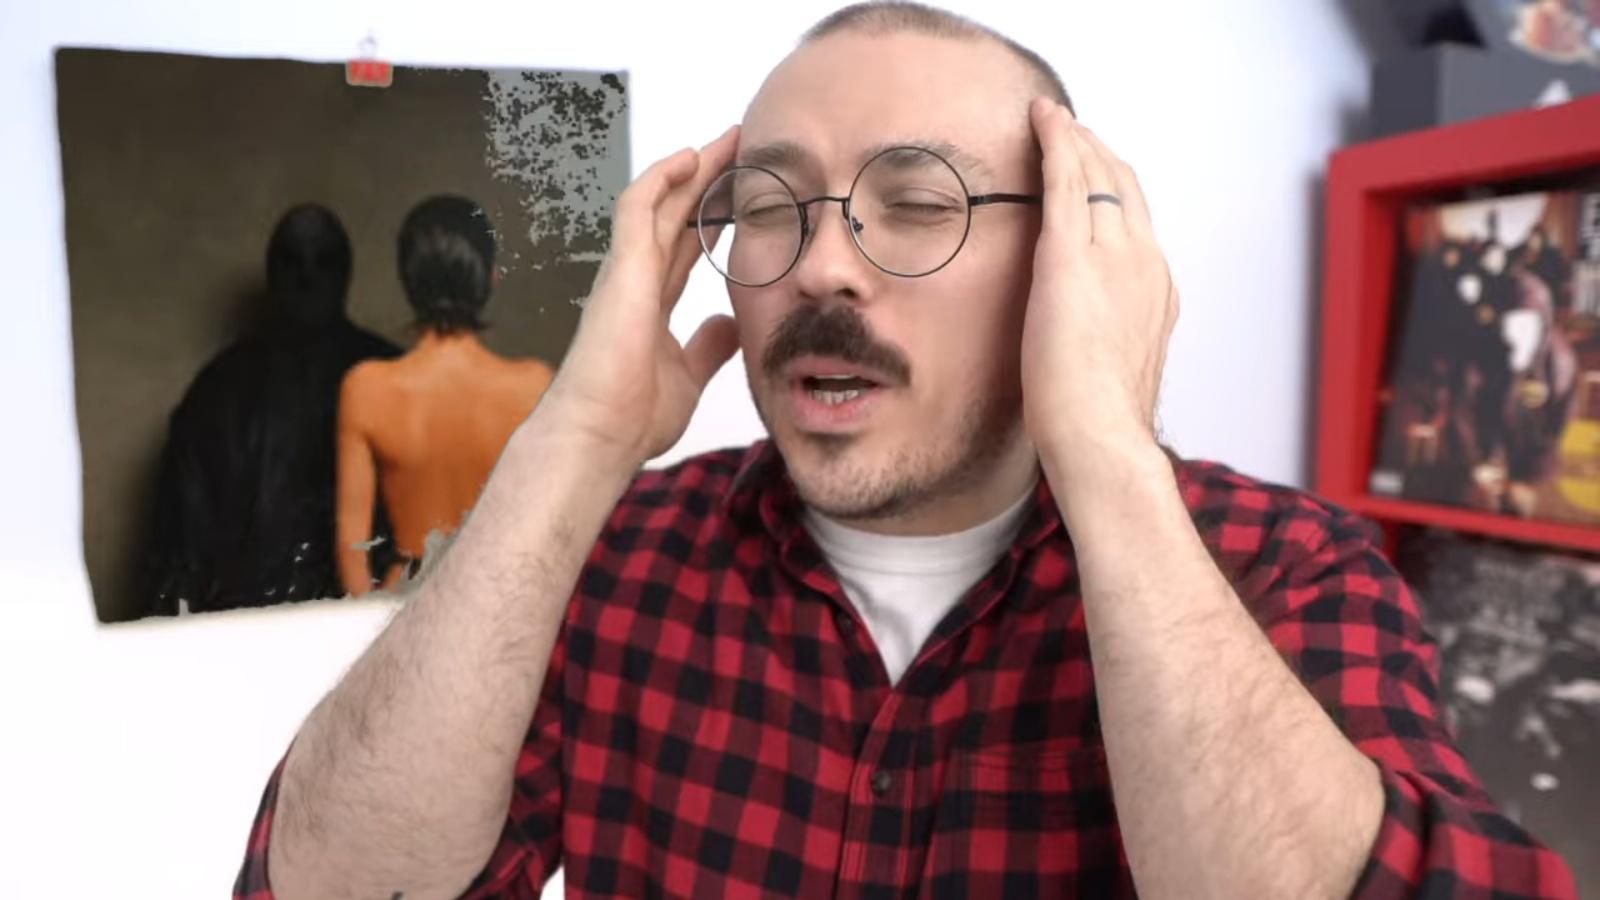 YouTube music critic Anthony Fantano looking stressed while reviewing a Kanye West album